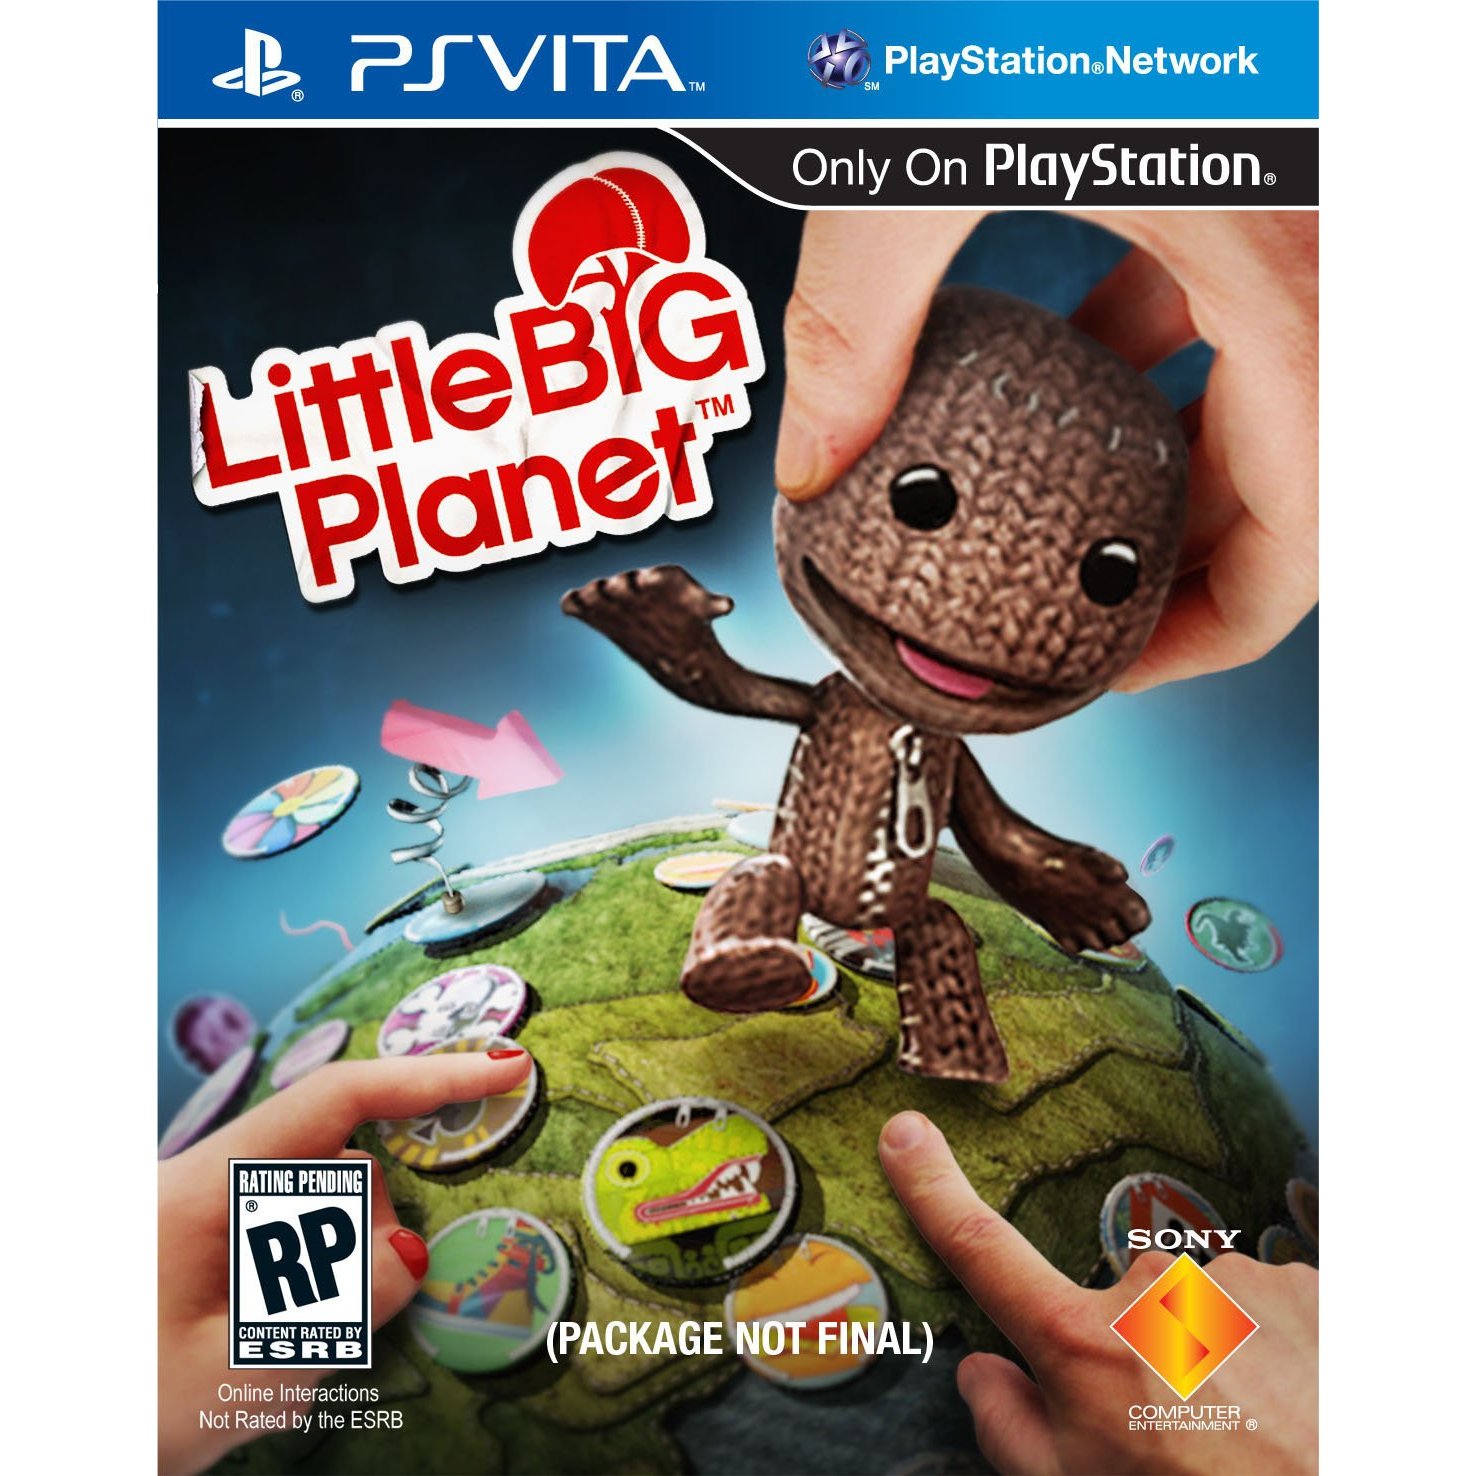 http://thetechjournal.com/wp-content/uploads/images/1112/1325043863-littlebigplanet--game-for-playstation-vita-now-preorder-available-1.jpg